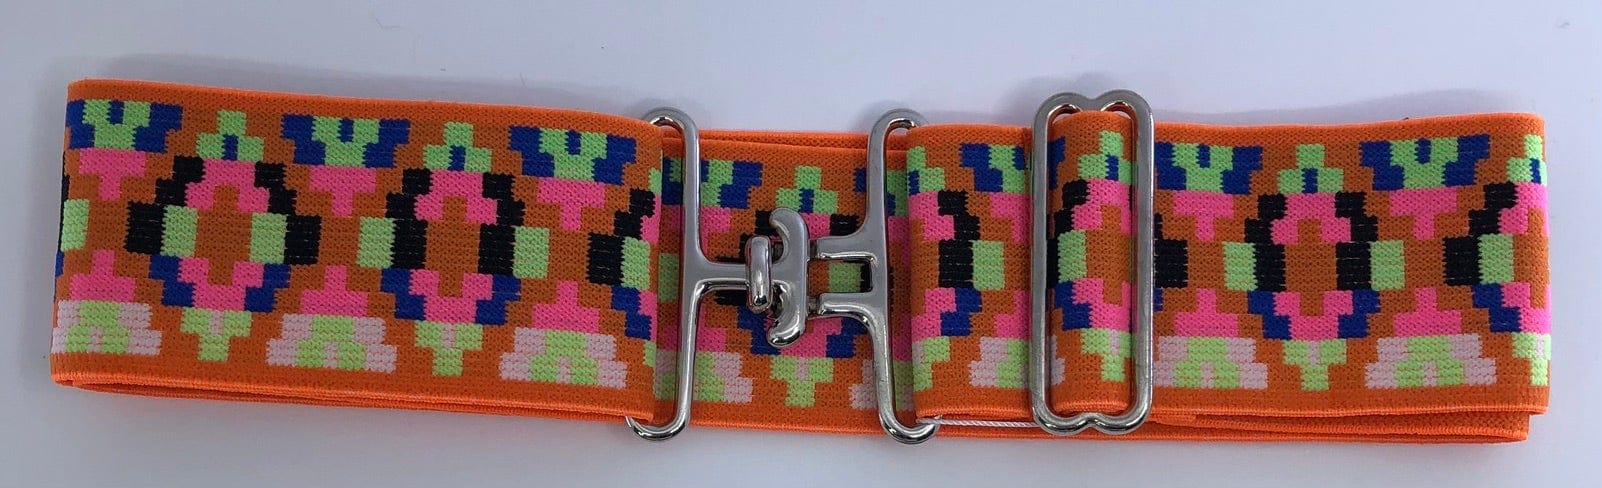 Blue Ribbon Belts Belt Silver T Buckle Orange Aztec Belt-2 inch equestrian team apparel online tack store mobile tack store custom farm apparel custom show stable clothing equestrian lifestyle horse show clothing riding clothes horses equestrian tack store